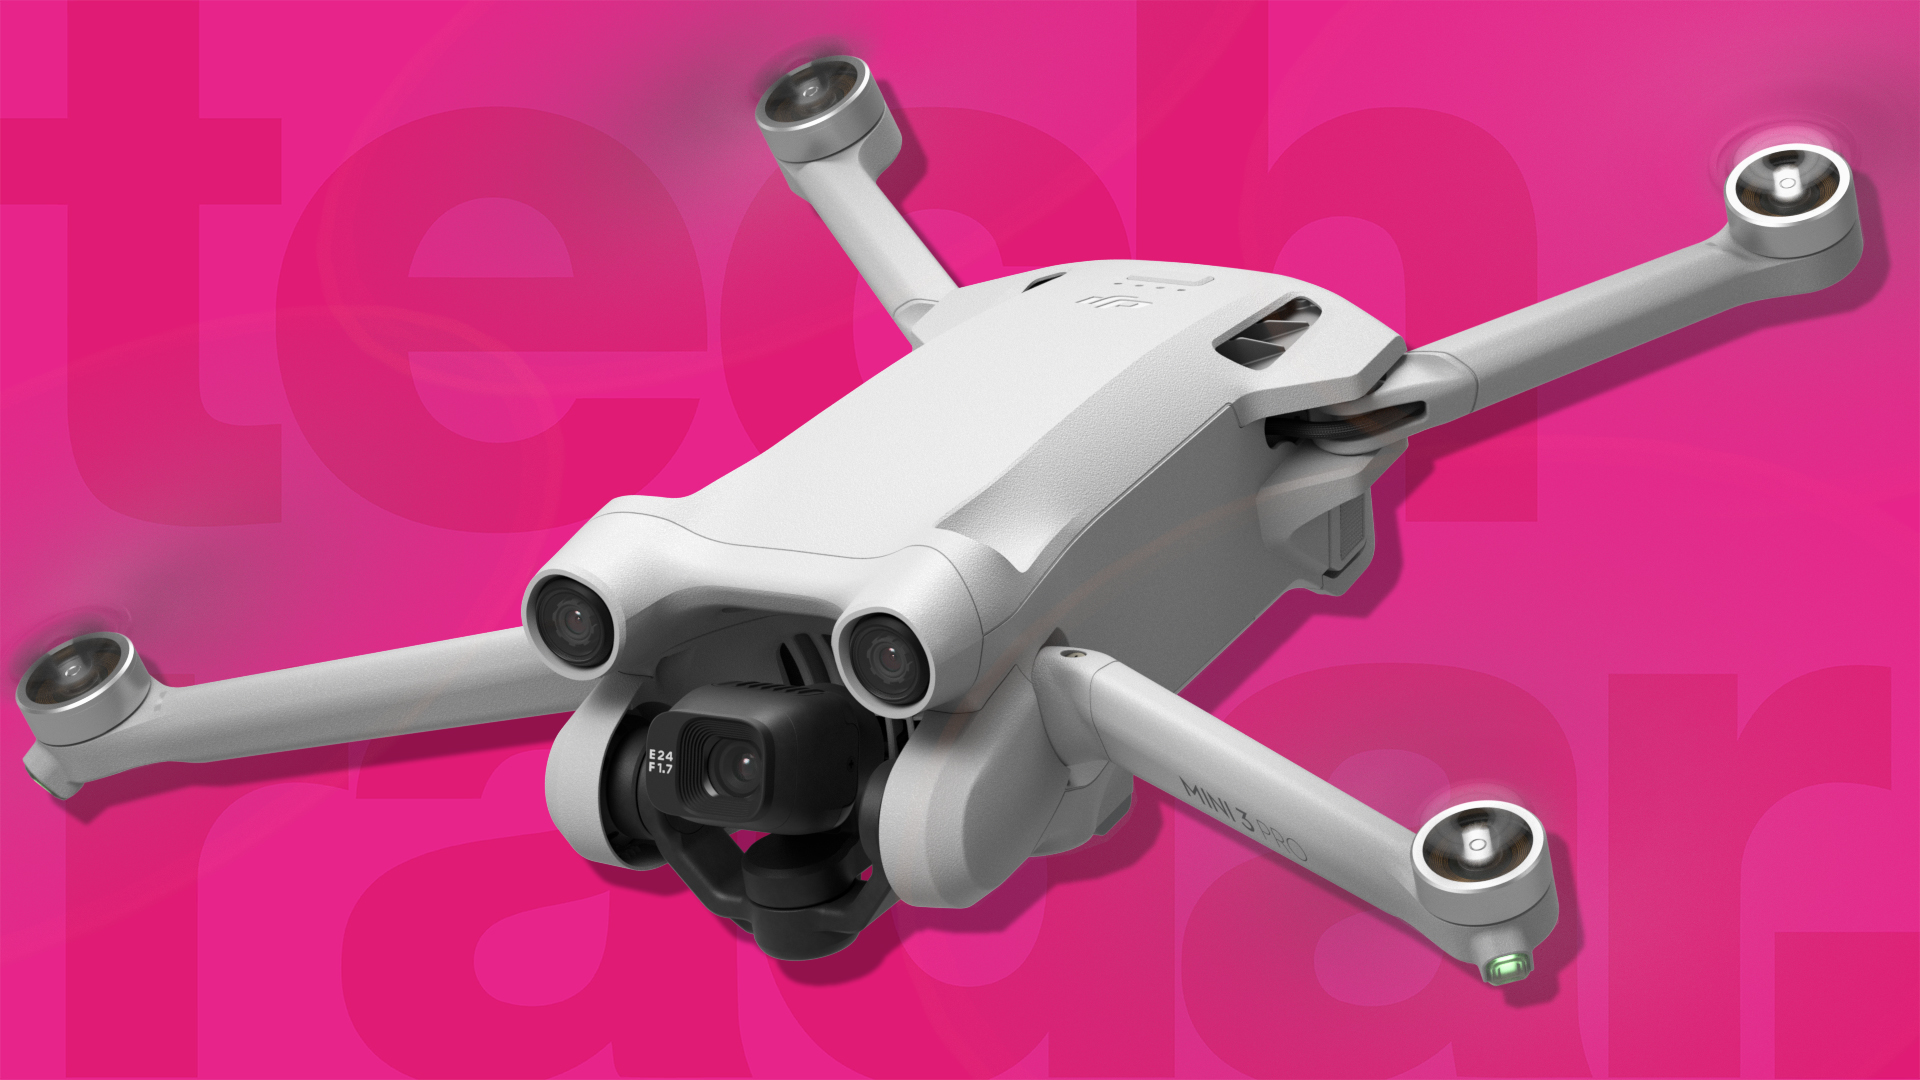 DJI Avata Review: Immersive FPV Flying For Any Drone Enthusiast